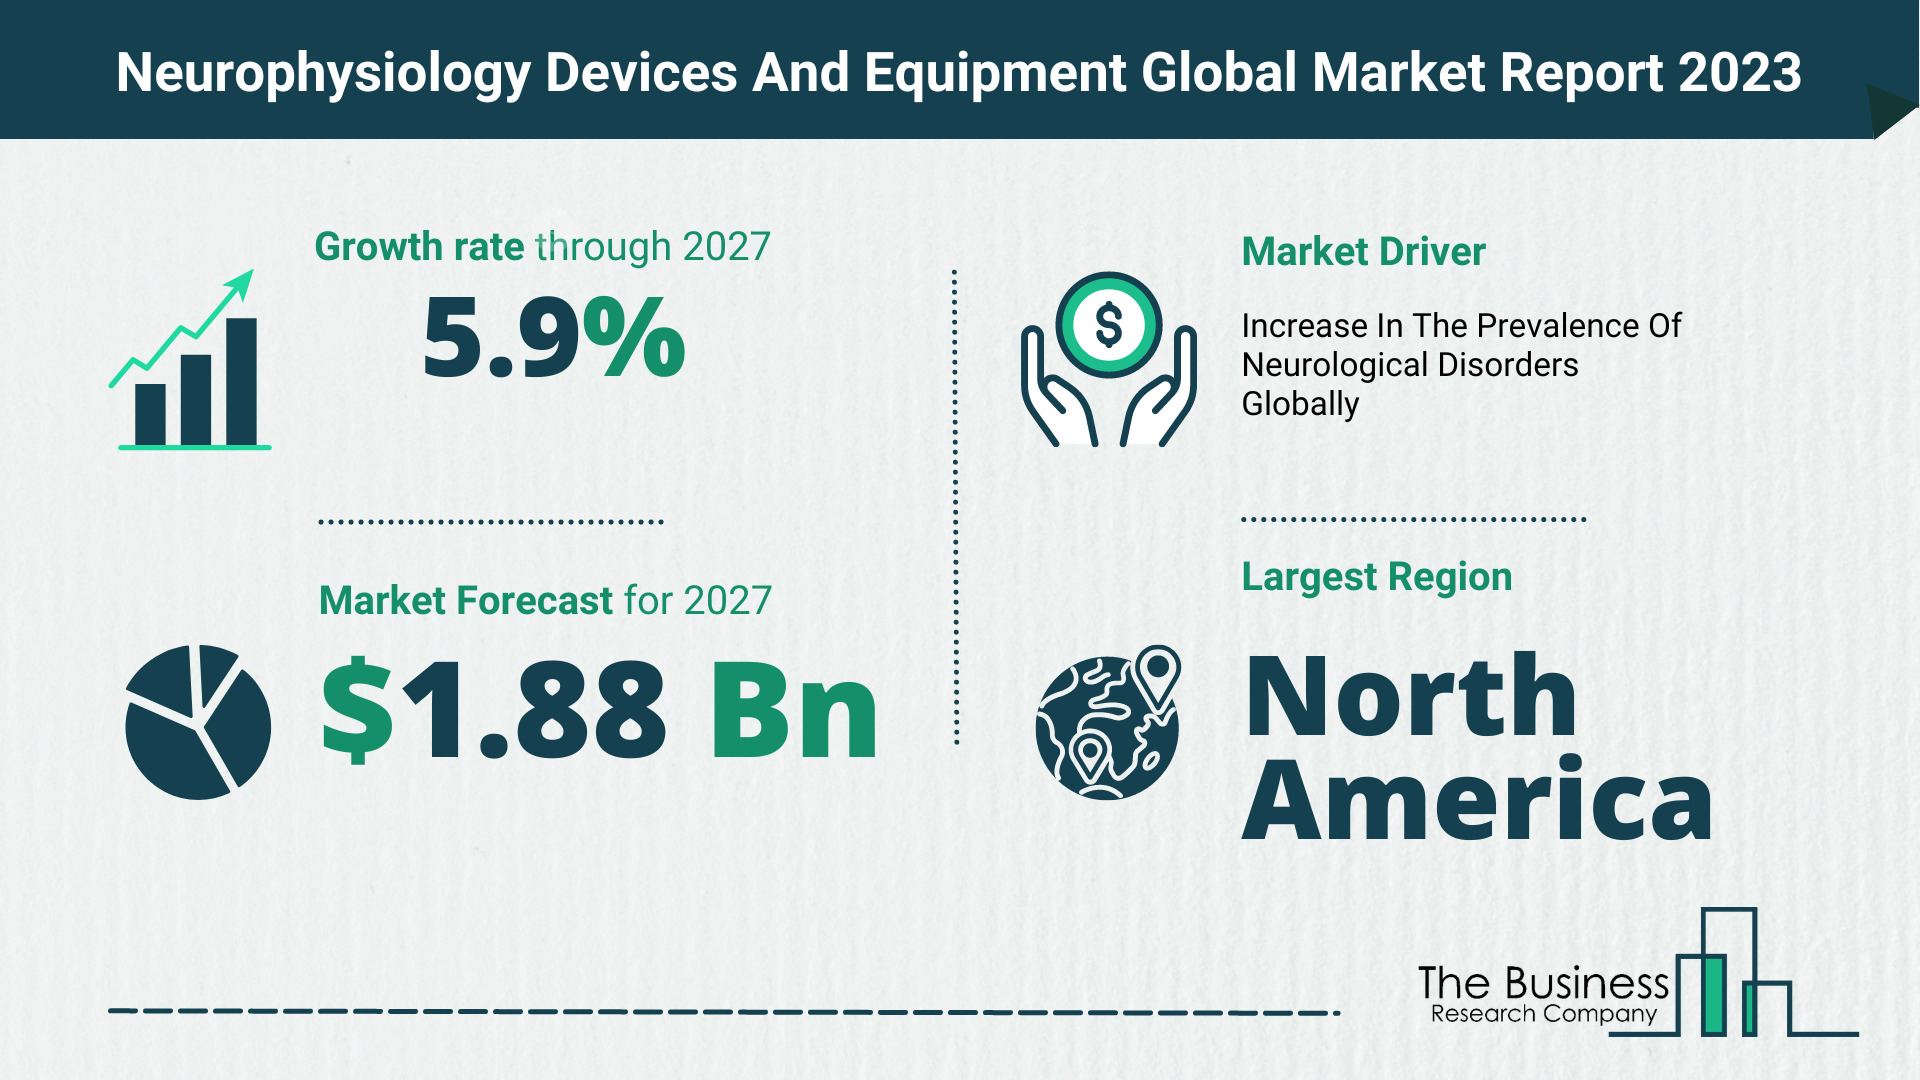 Global Neurophysiology Devices And Equipment Market Size